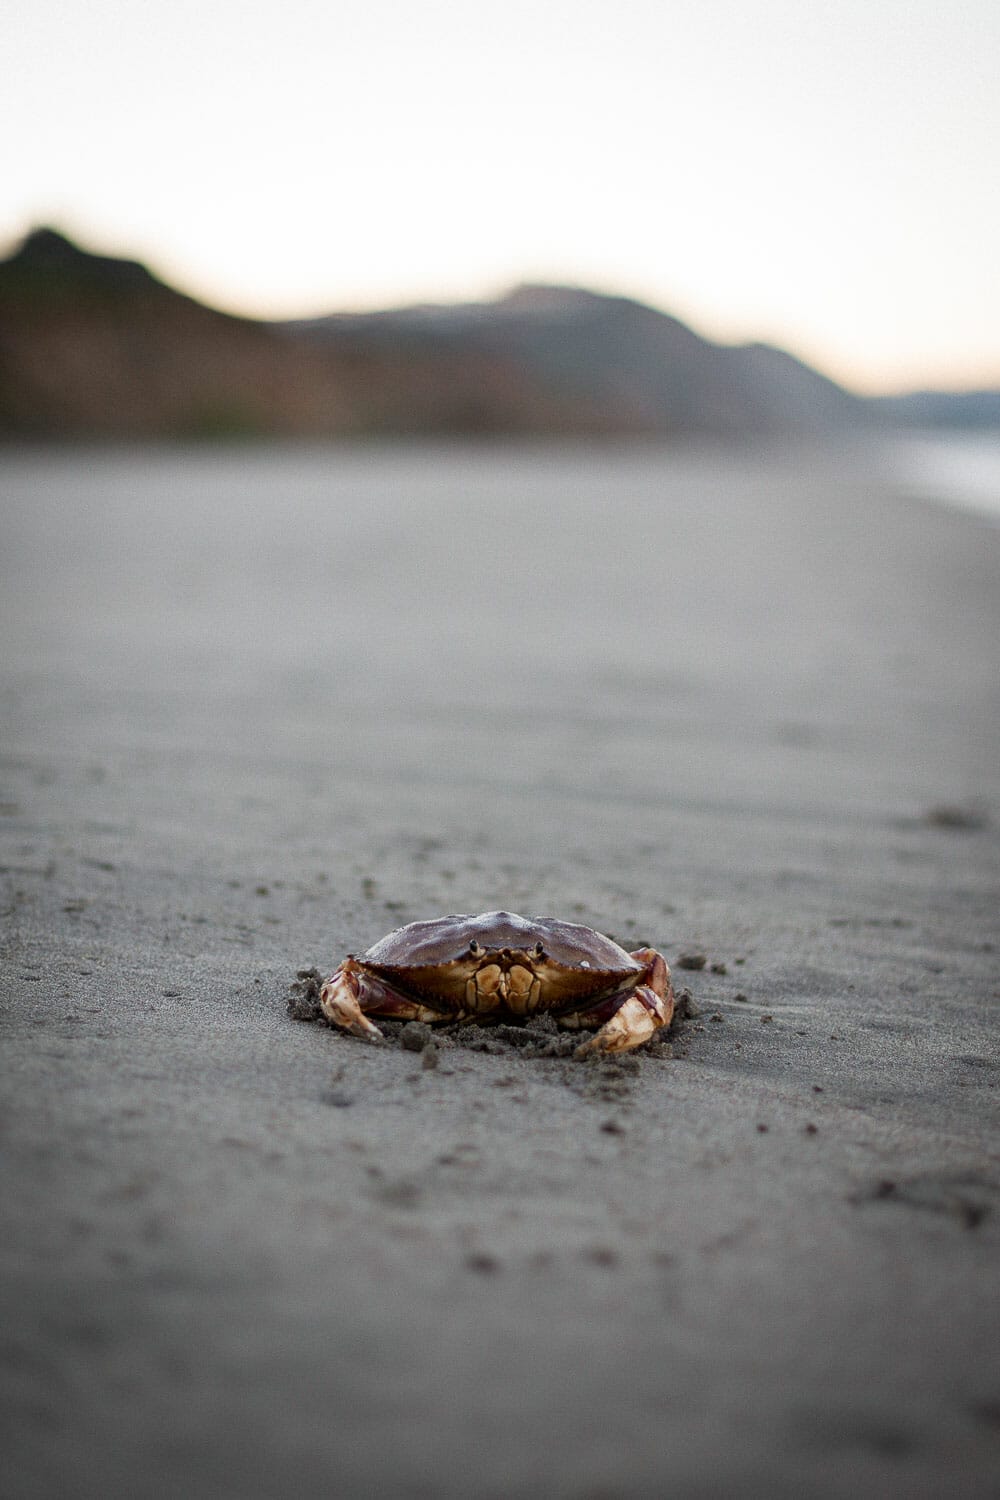 A lone crab on a sandy beach with a blurred background of a hill.